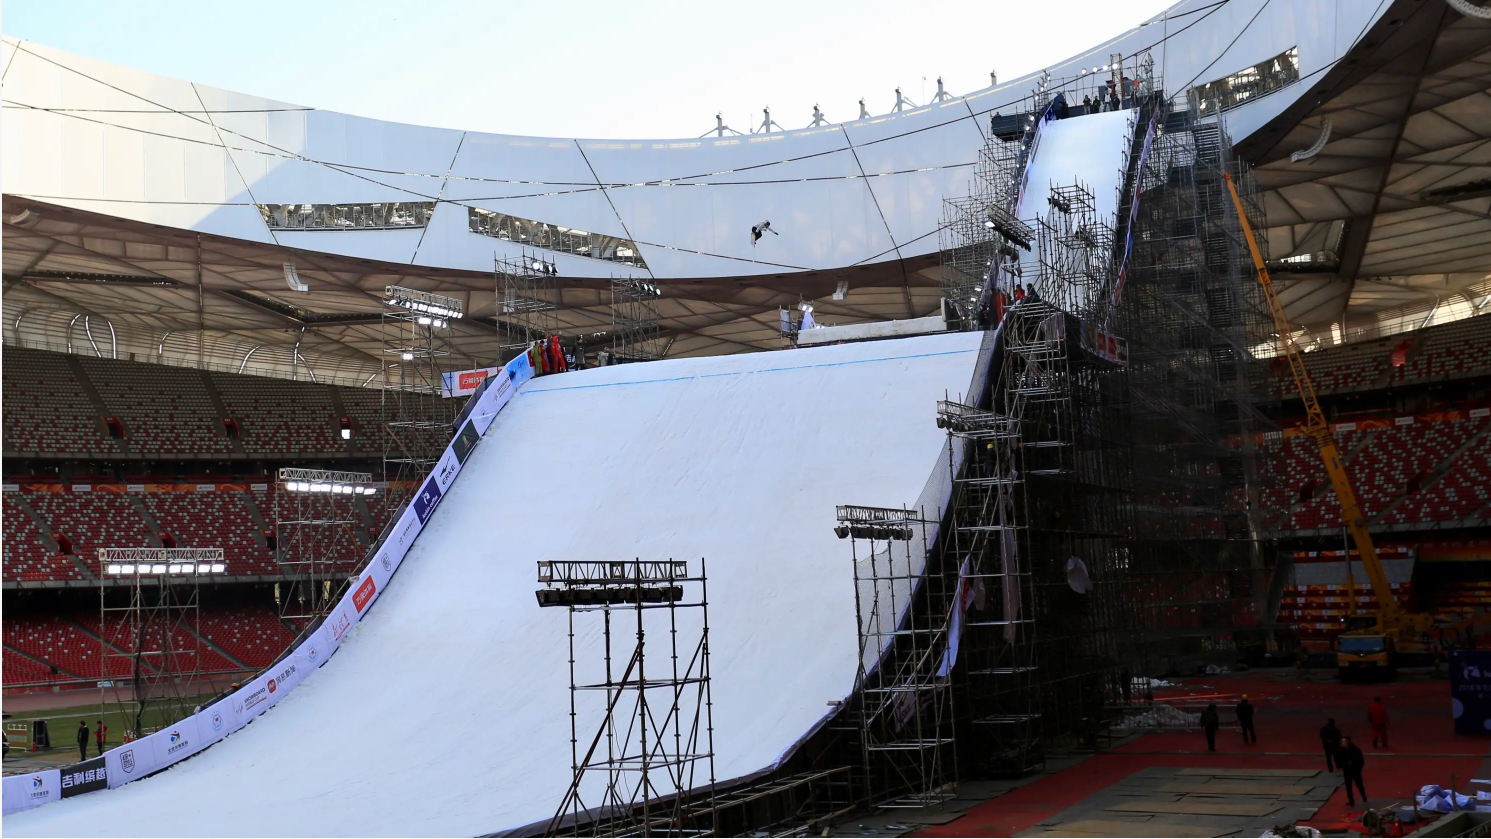 The FIS Snowboard Big Air World Cup is set to resume this weekend with 2022 Winter Olympic Games hosts Beijing staging the latest leg at its National Stadium ©FIS Snowboard